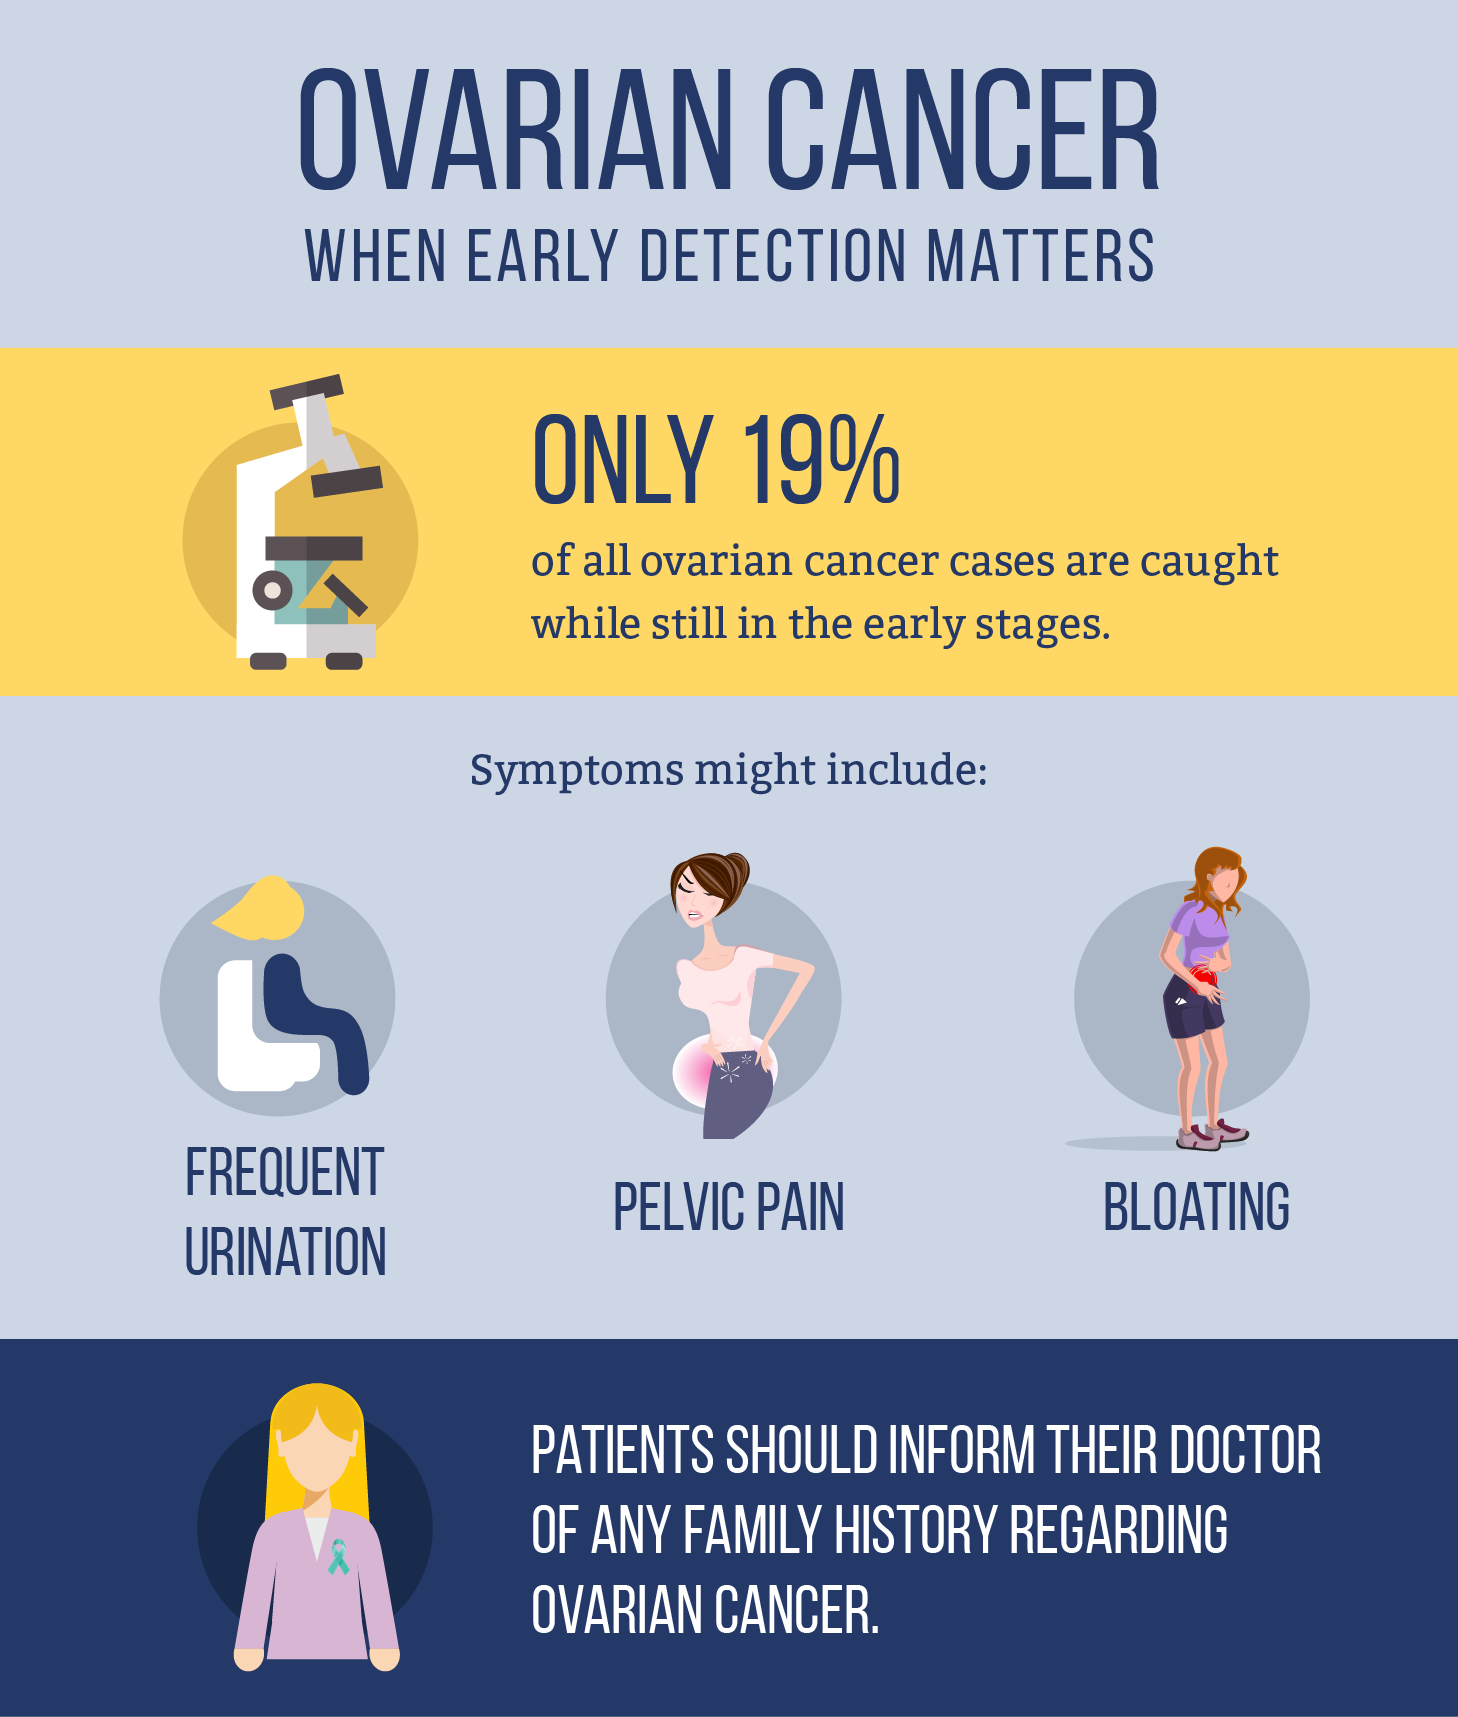 Ovarian Cancer - When Early Detection Matters